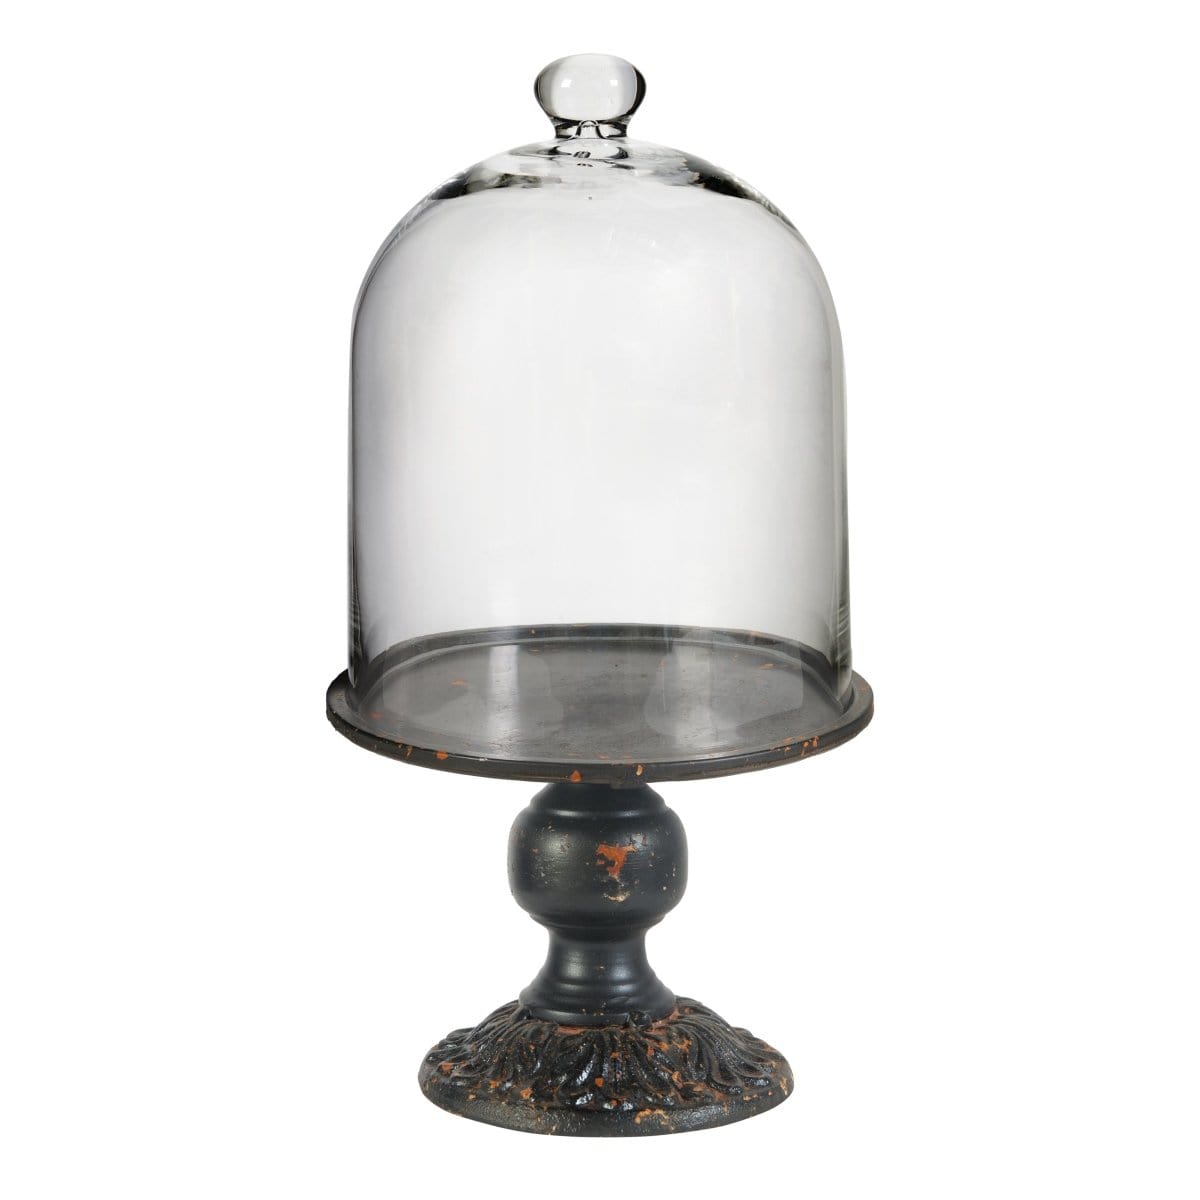 AB-33895  Maguire Pedestal Plate with Glass Dome picket and rail